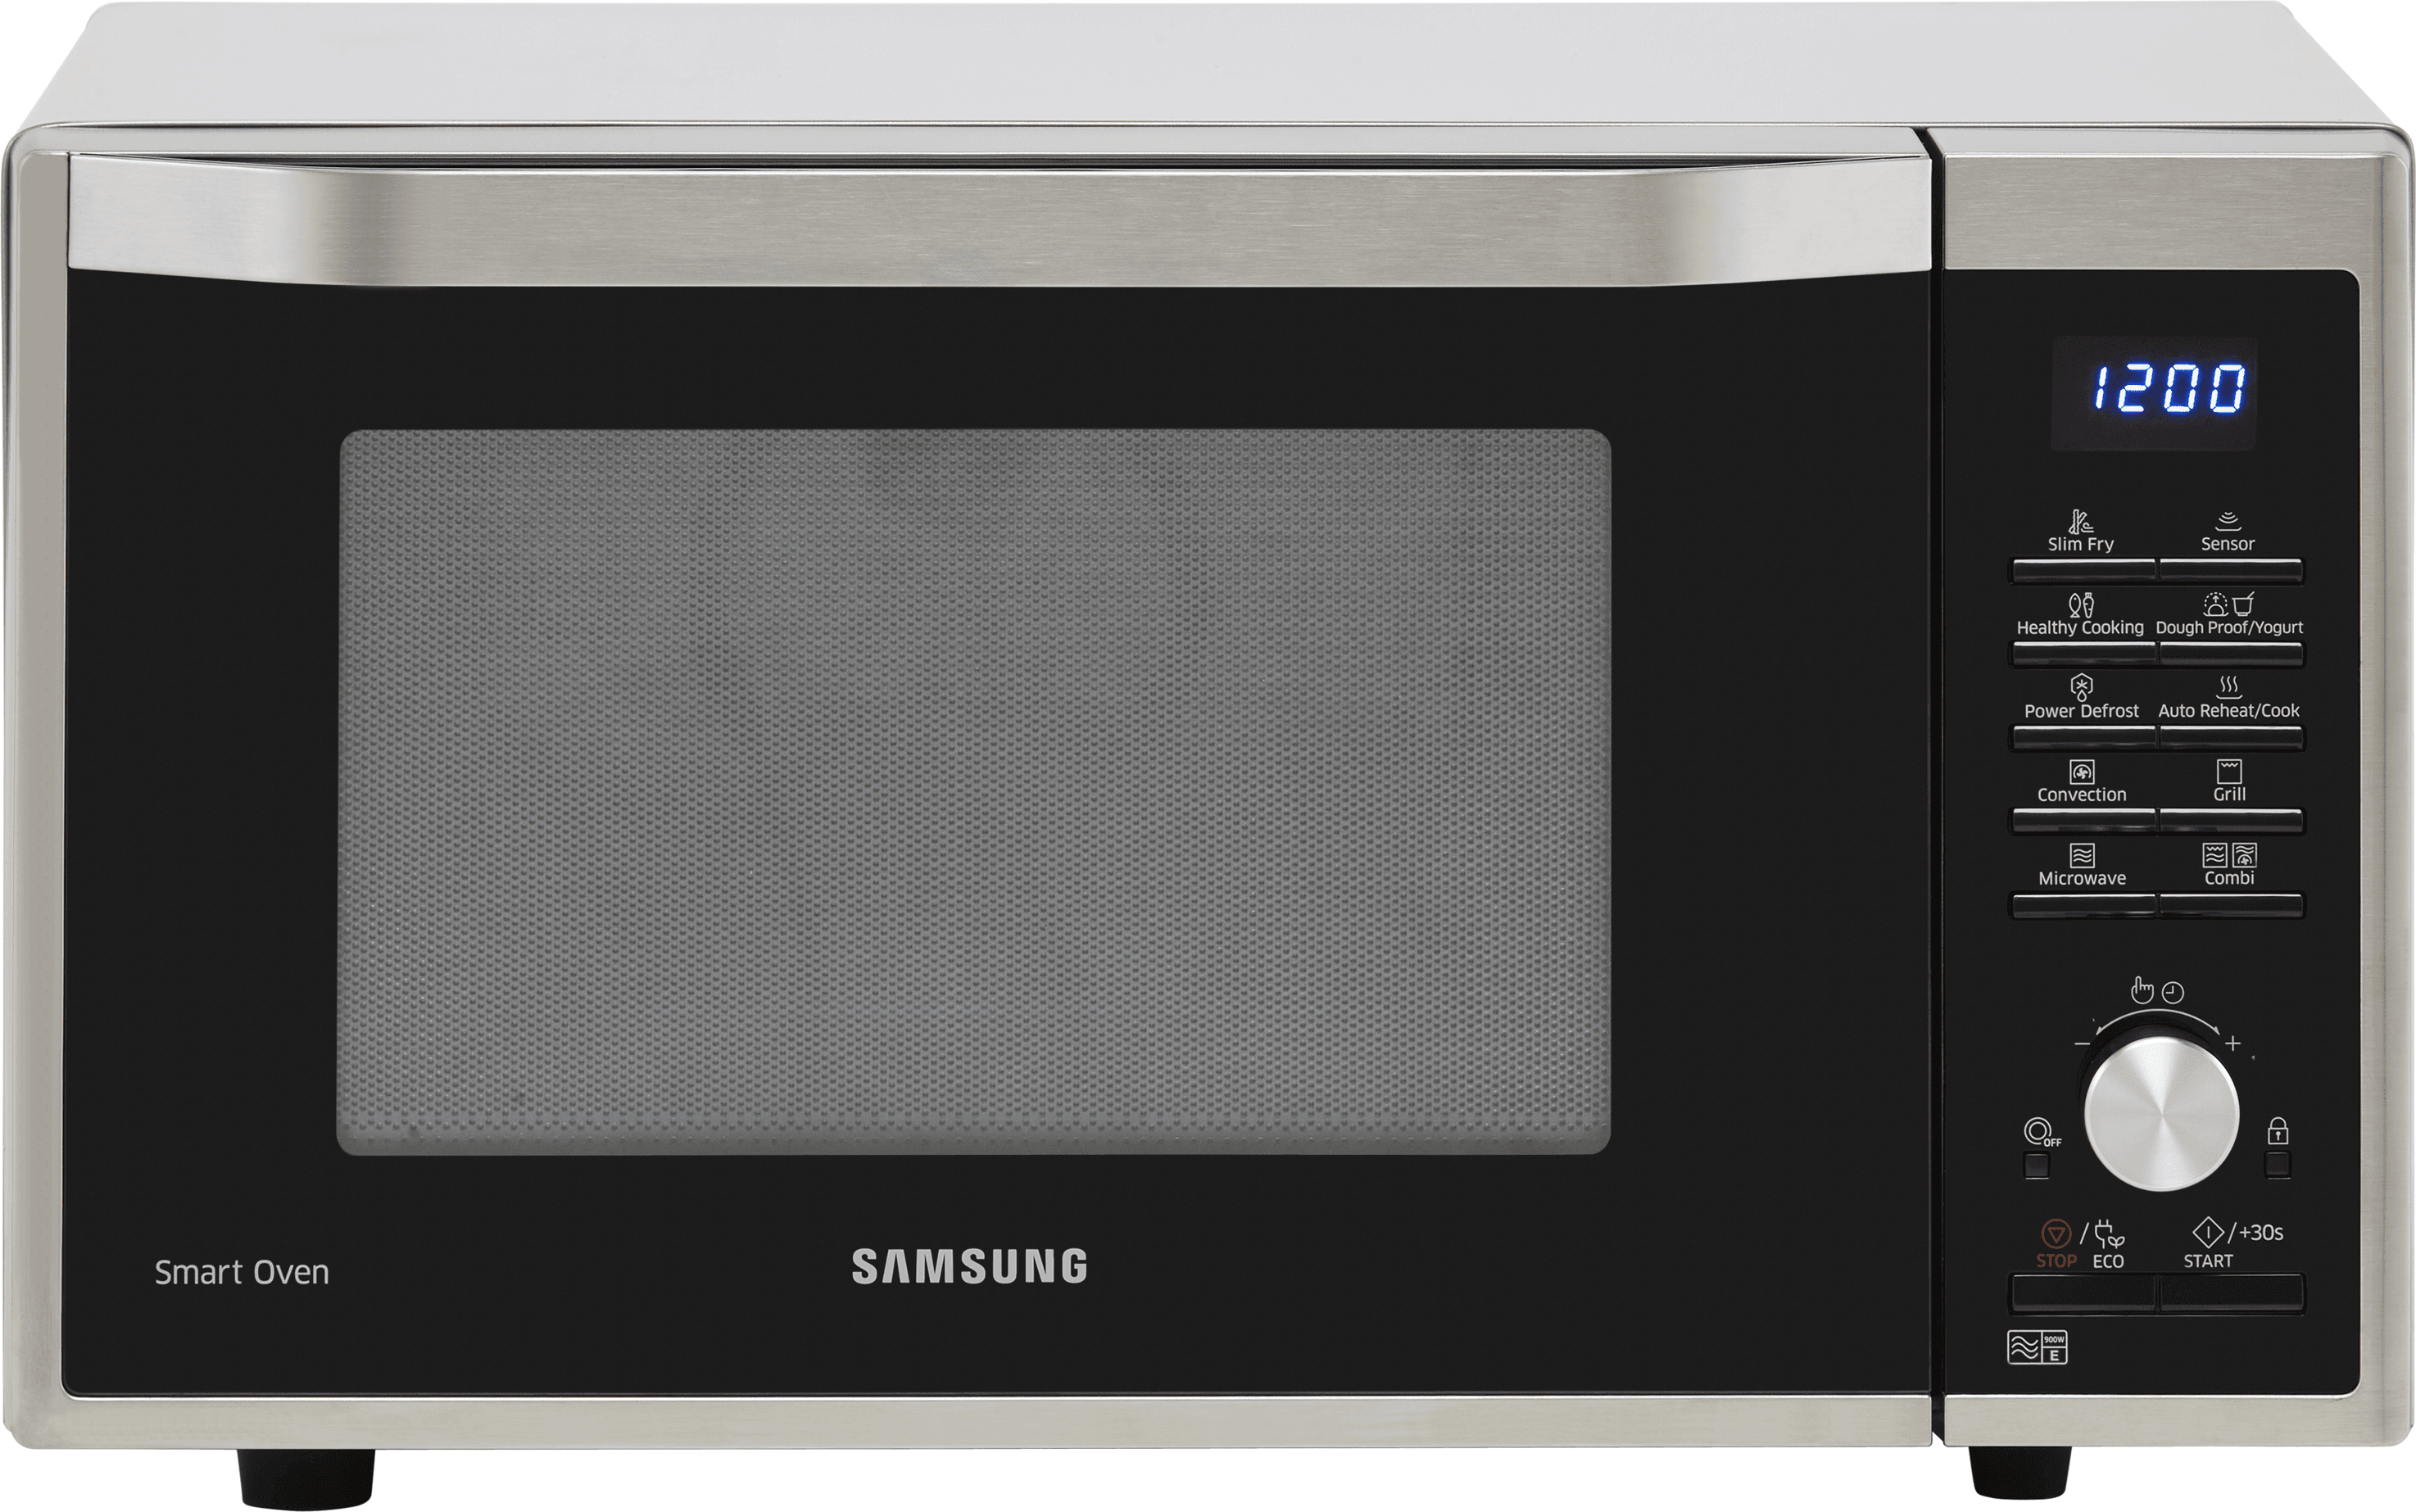 Samsung MC32J7055CT Freestanding 31cm Tall Microwave - Stainless Steel, Stainless Steel